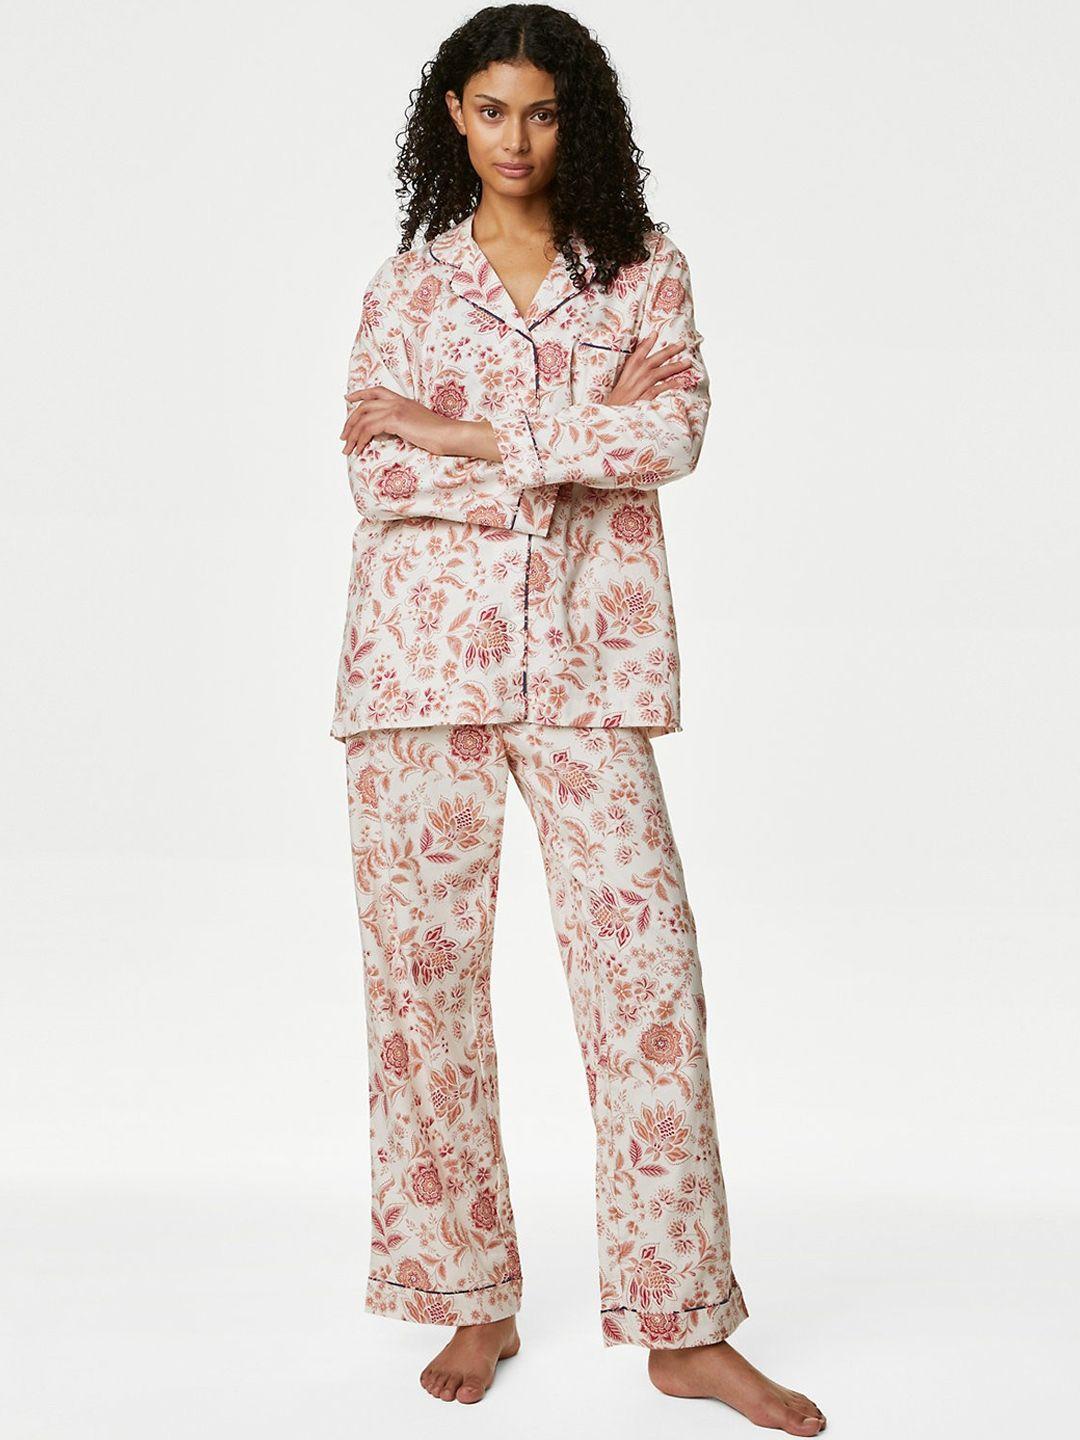 marks & spencer pure cotton printed night suit